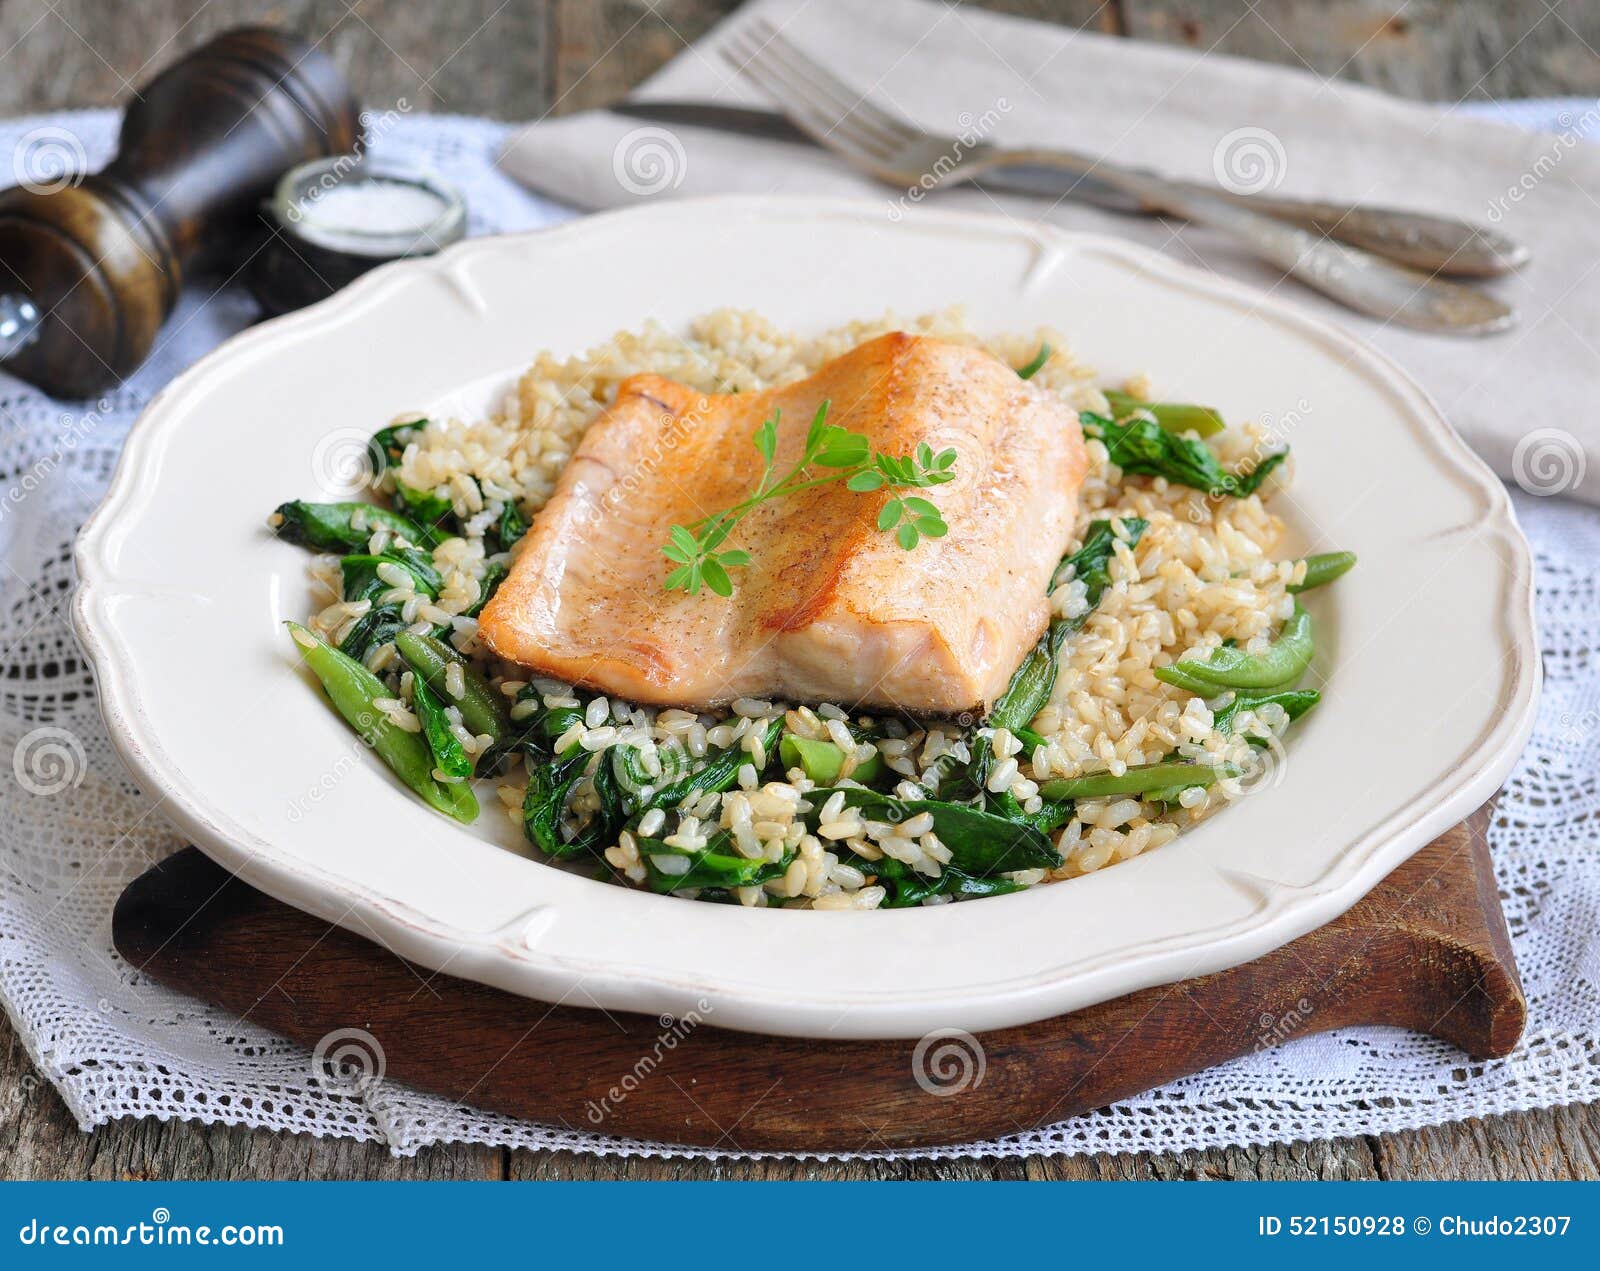 fried salmon with brown rice, spinach and leguminous kidney bean